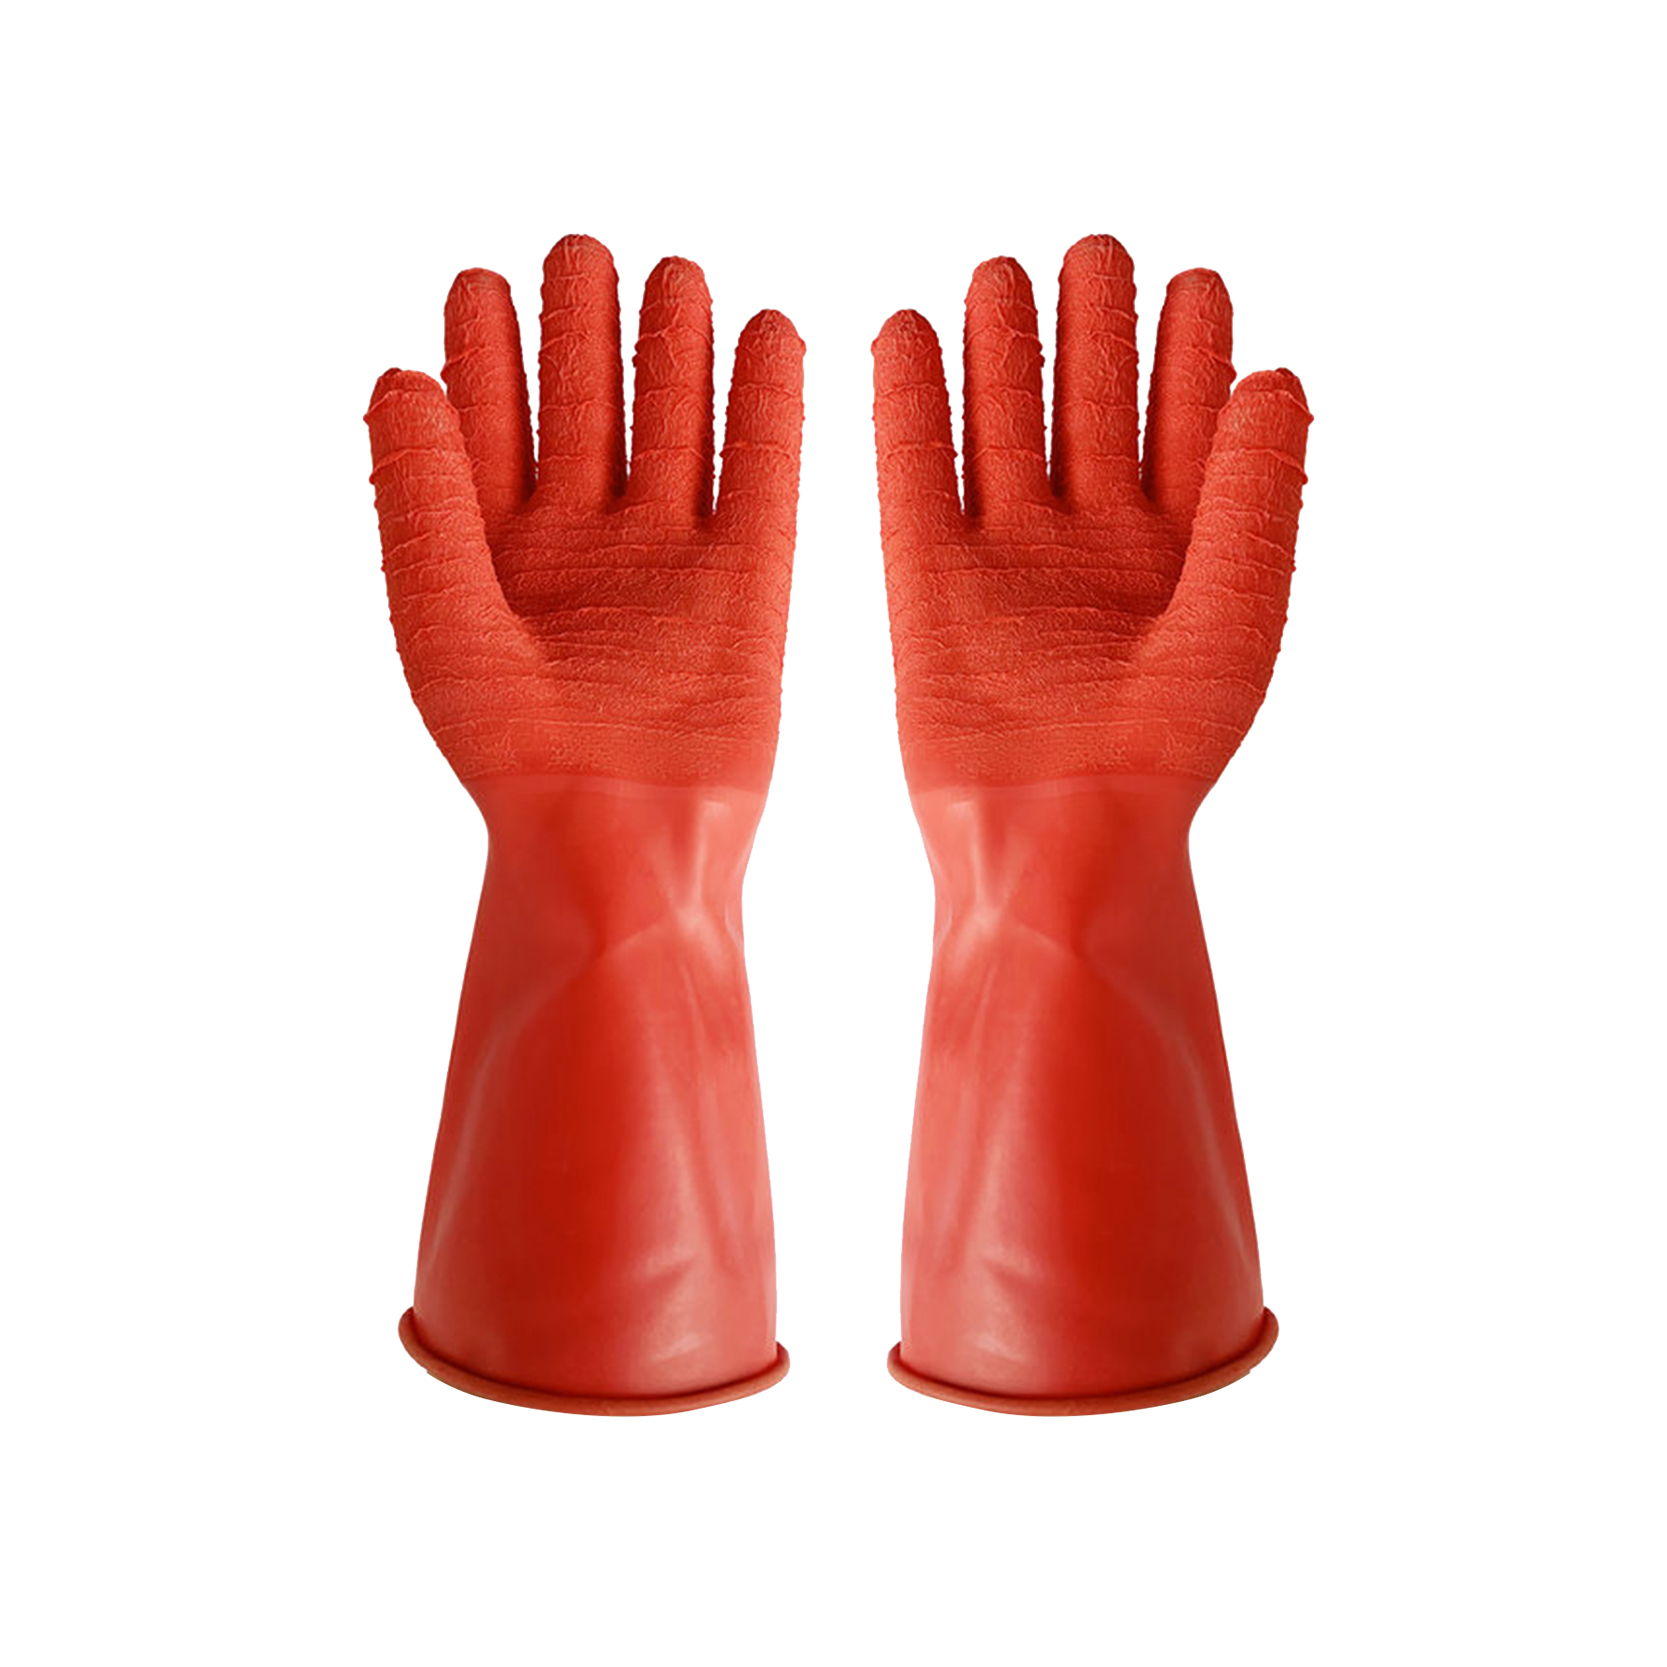 Anti Slip Mechanical Chemical Protective Red Natural Latex Rubber Glove na May Wrinkle Palm